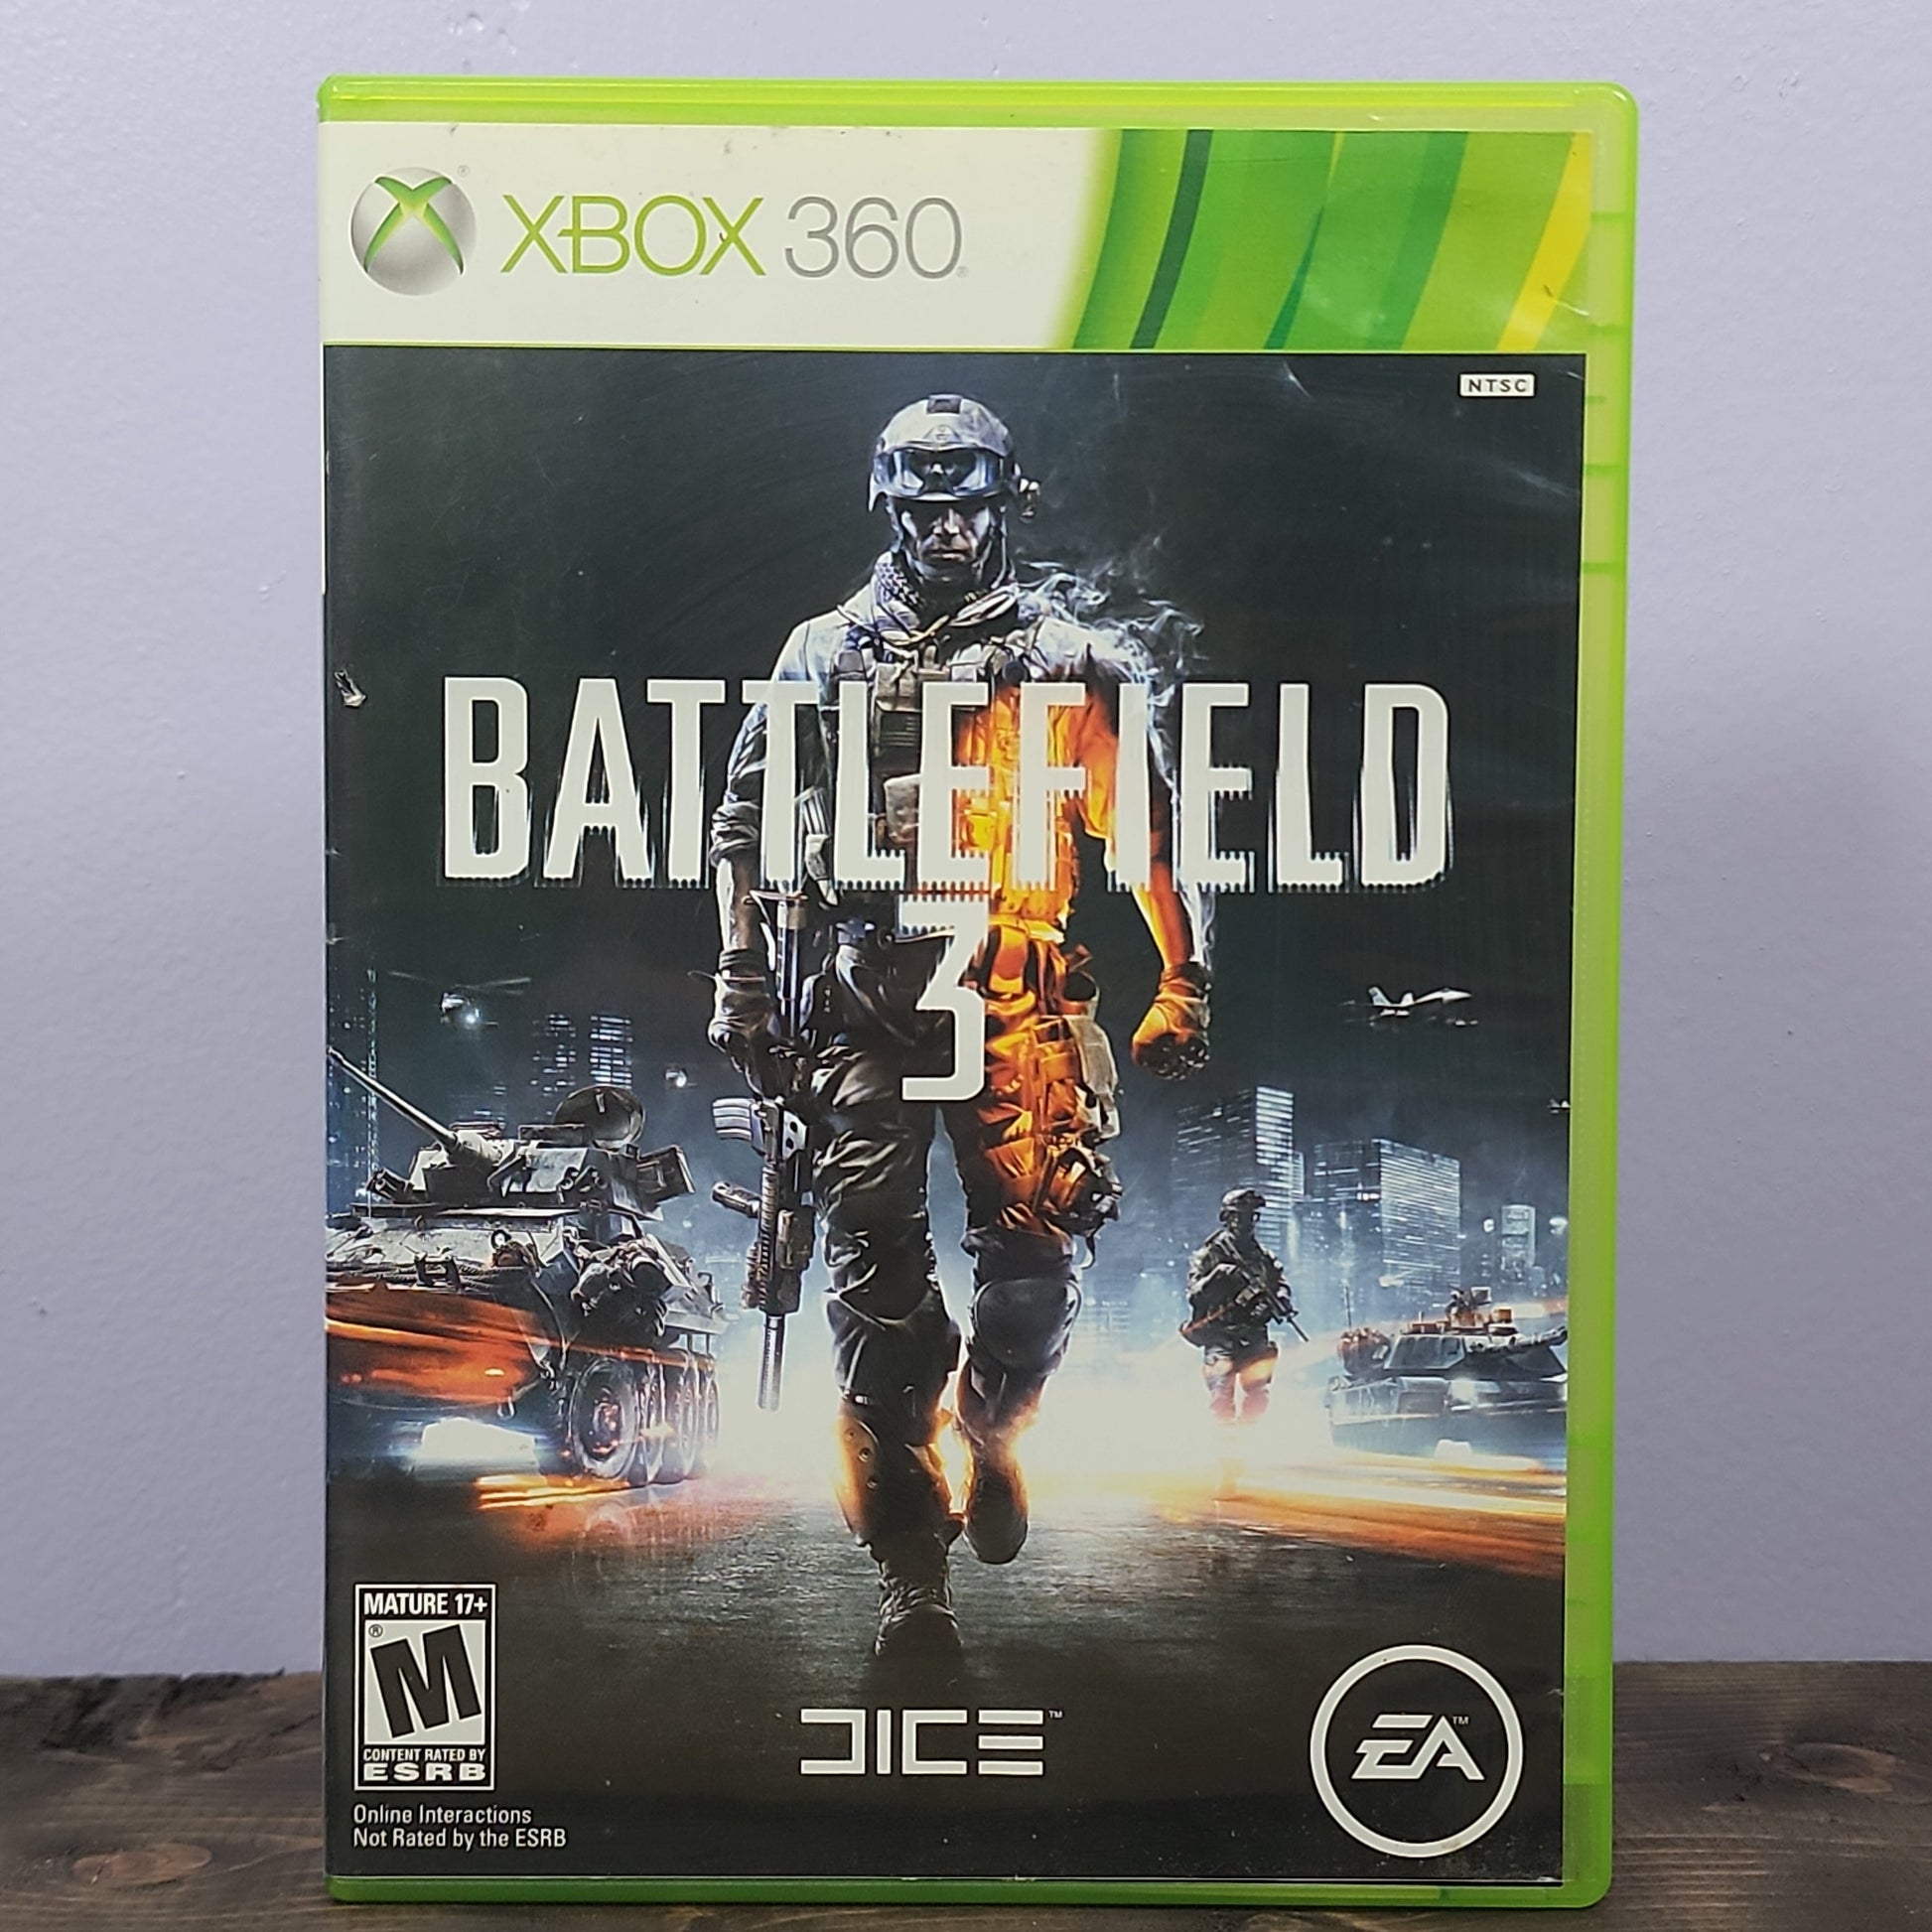 Xbox 360 - Battlefield 3 Retrograde Collectibles Action, Battlefield Series, CIB, DICE, EA, First Person Shooter, FPS, M Rated, Multiplayer, Shooter, Preowned Video Game 